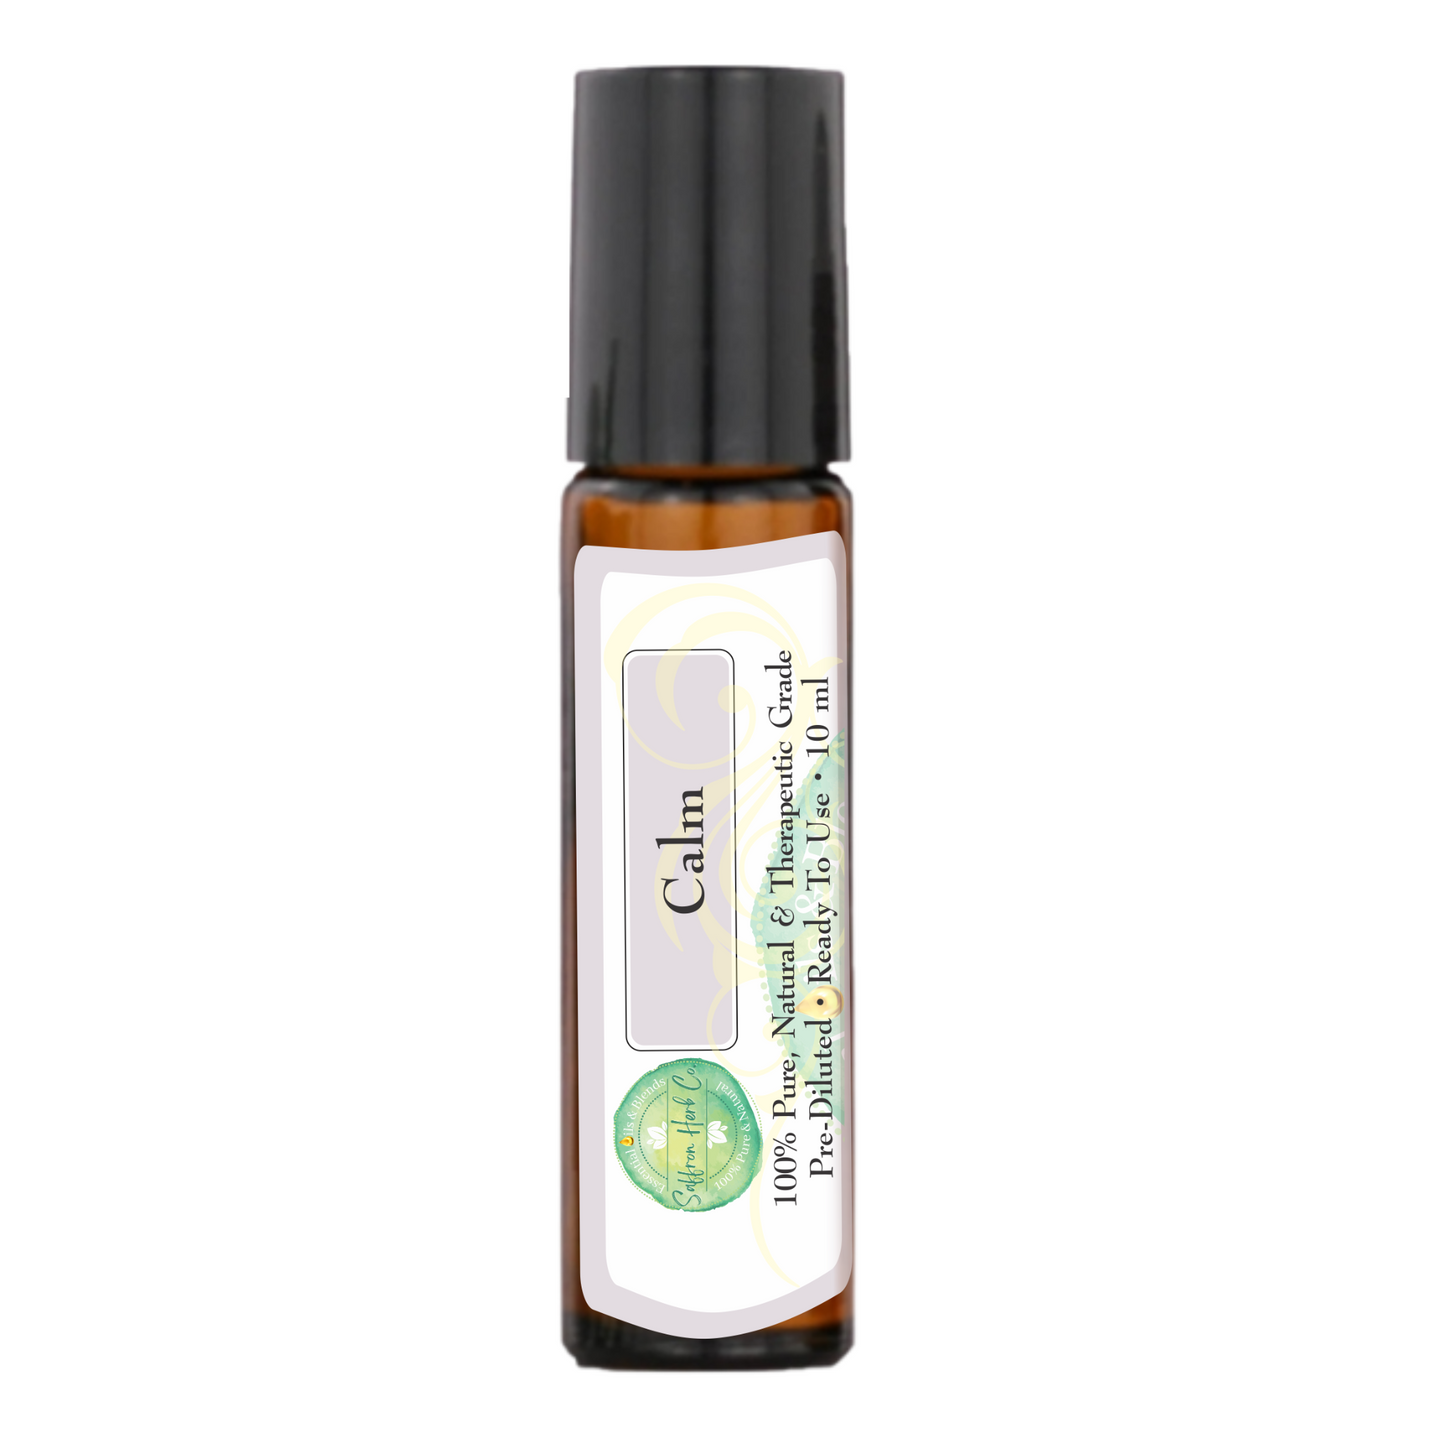 Calm™ Essential Oil Roller Bottle Blend • 100% Pure & Natural • Pre-Diluted • Ready To Use